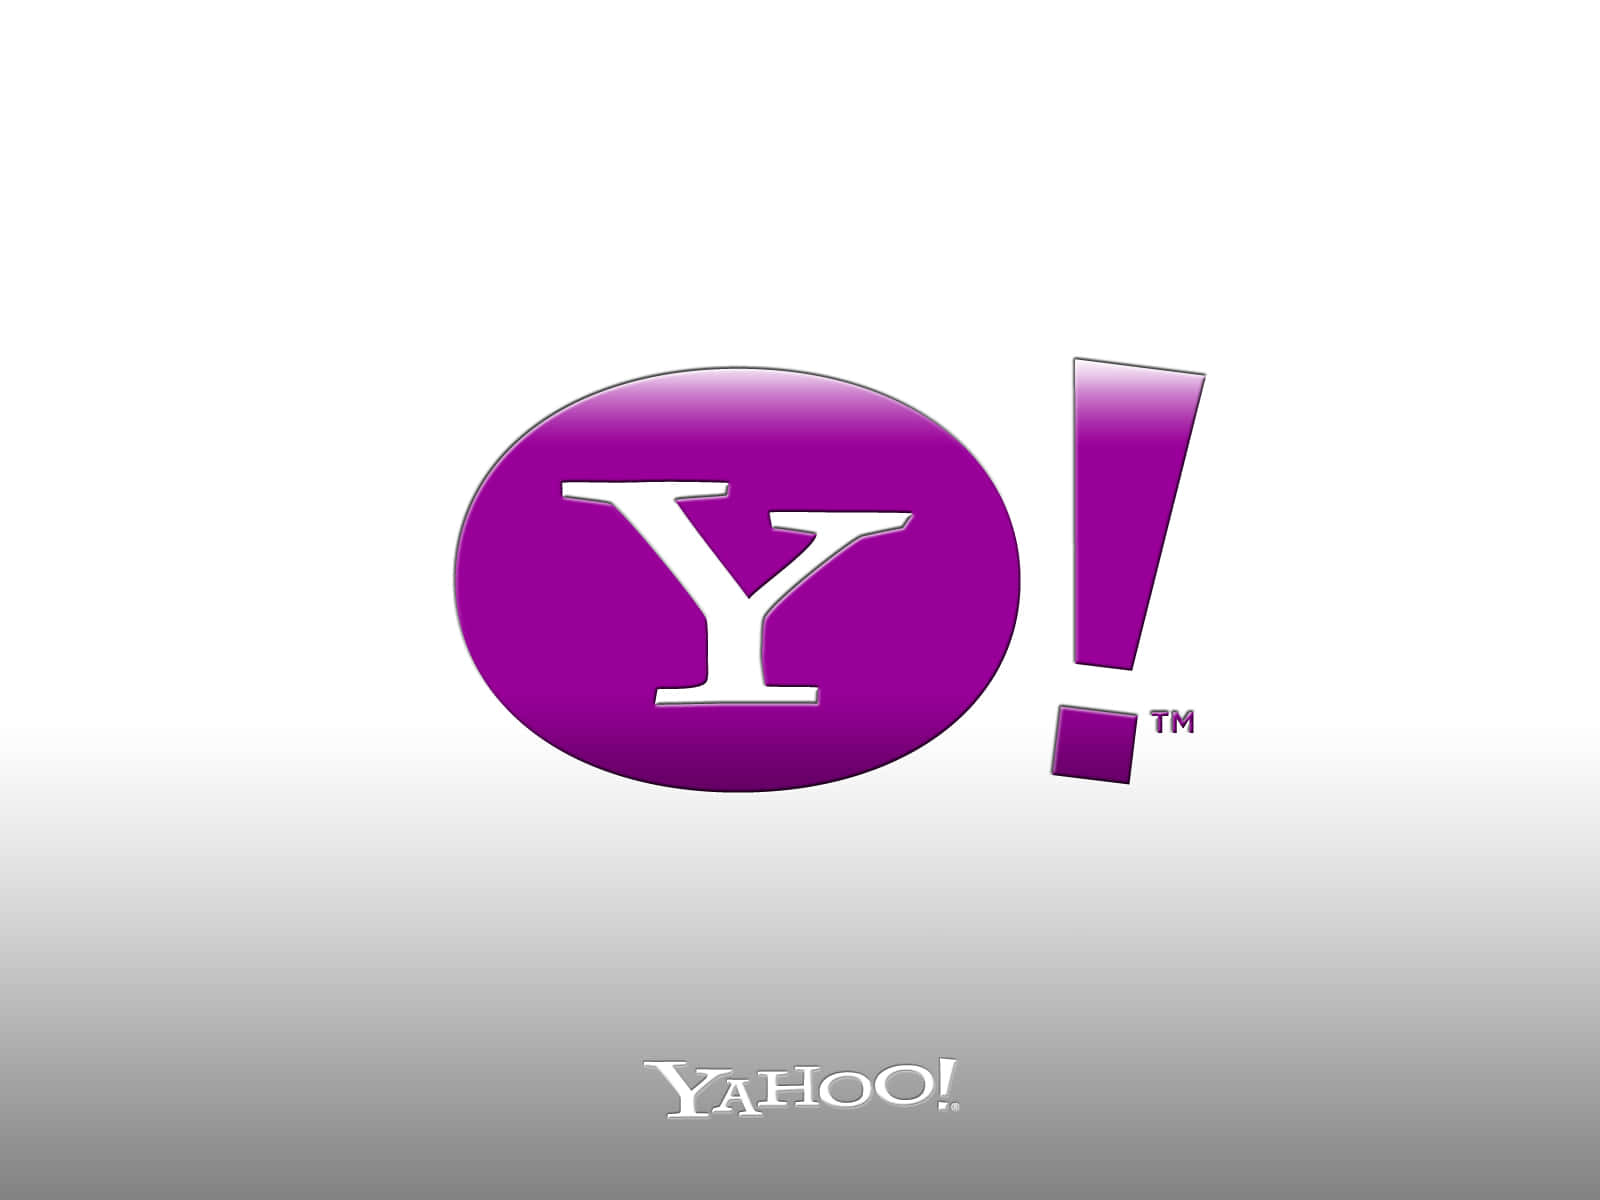 Yahoo - Get the Latest News, Sports, and Entertainment